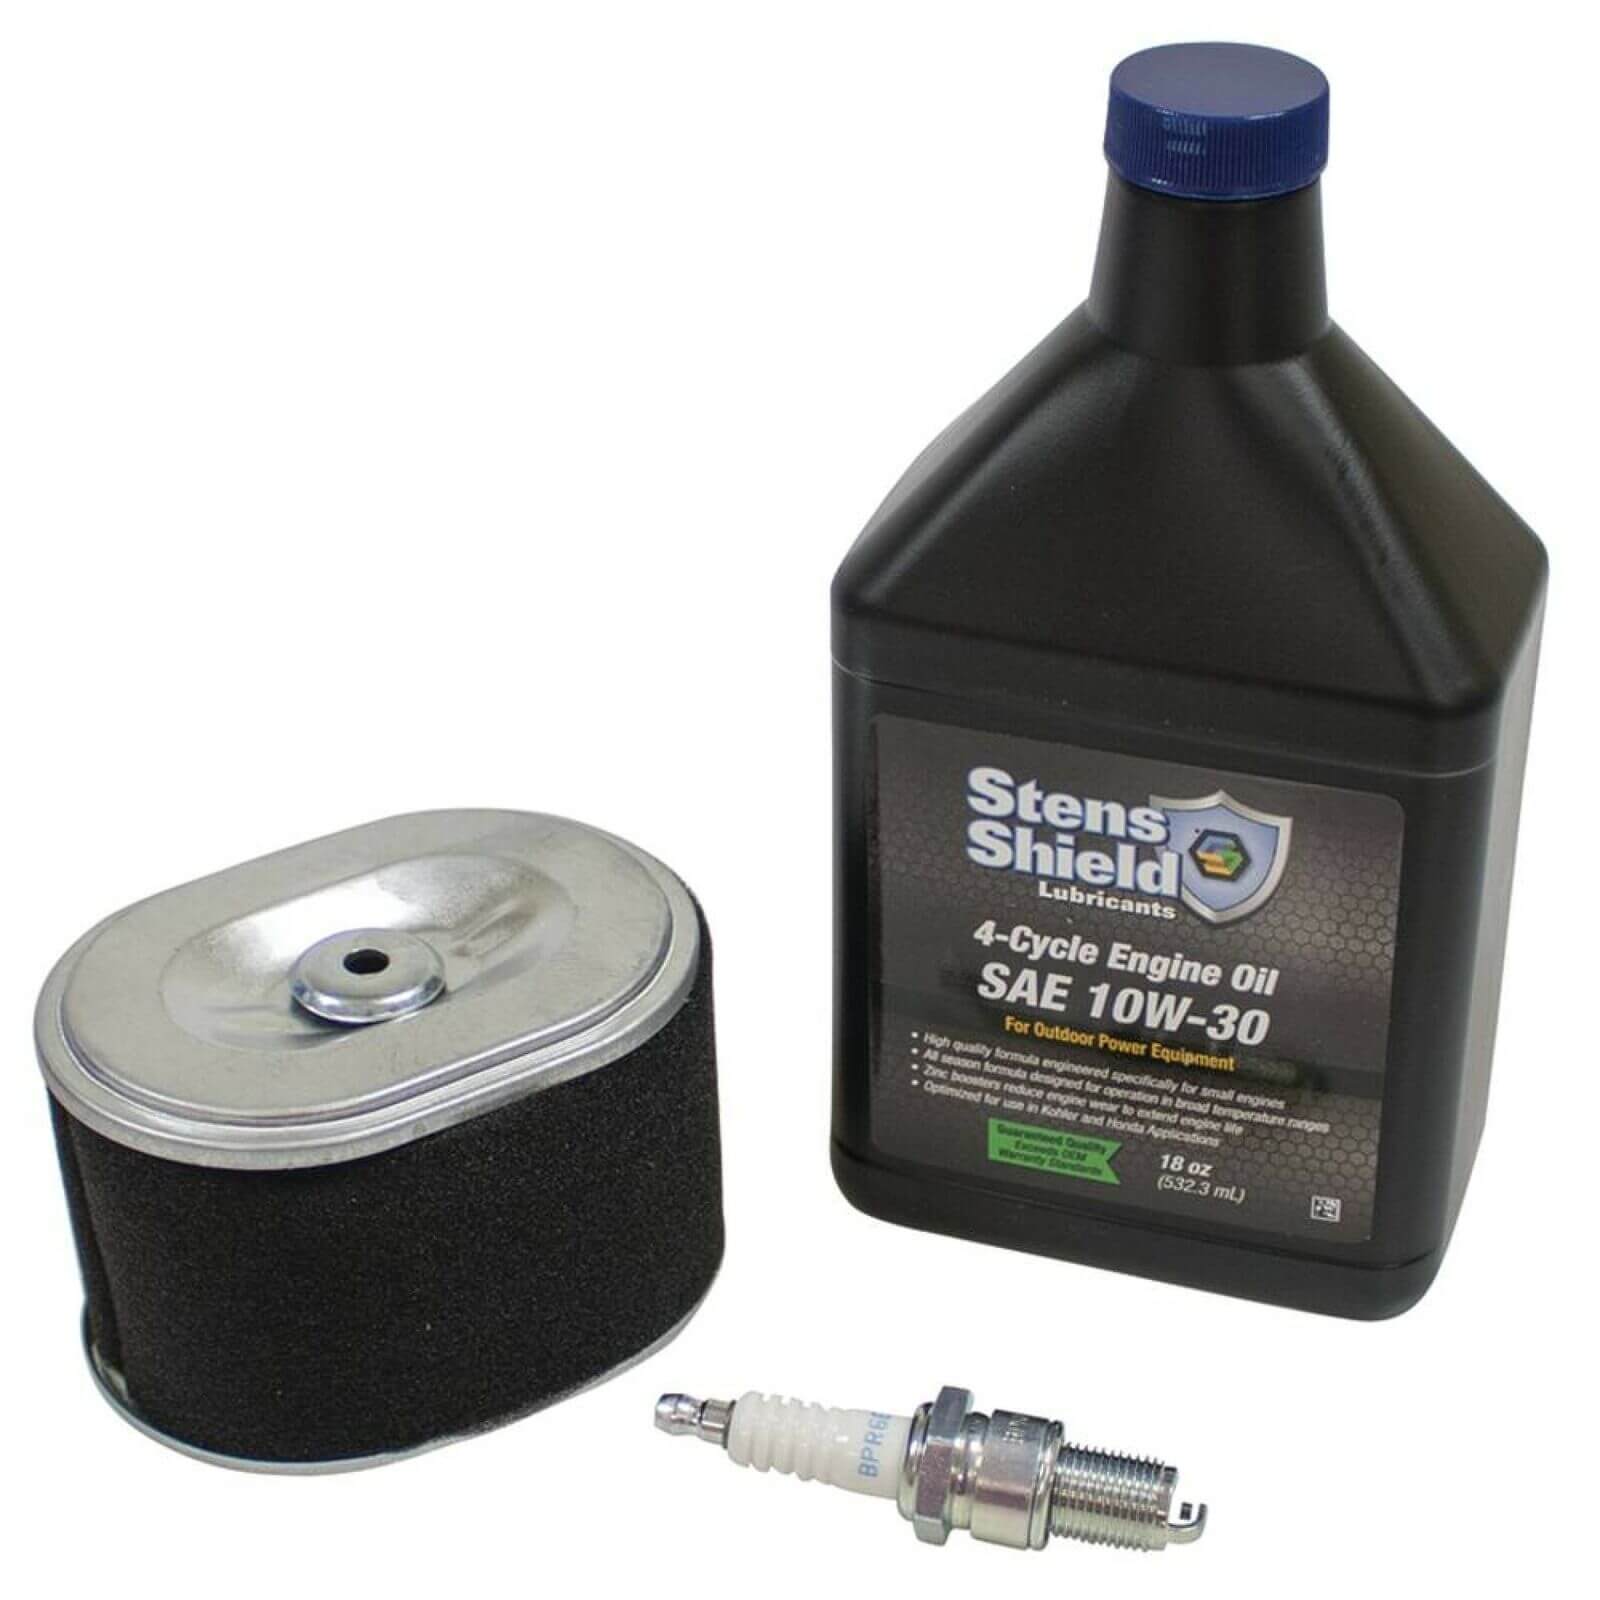 Replaces Maintenance Tune Up Kit For Stark Model 61057 Gas Cut Off Saw